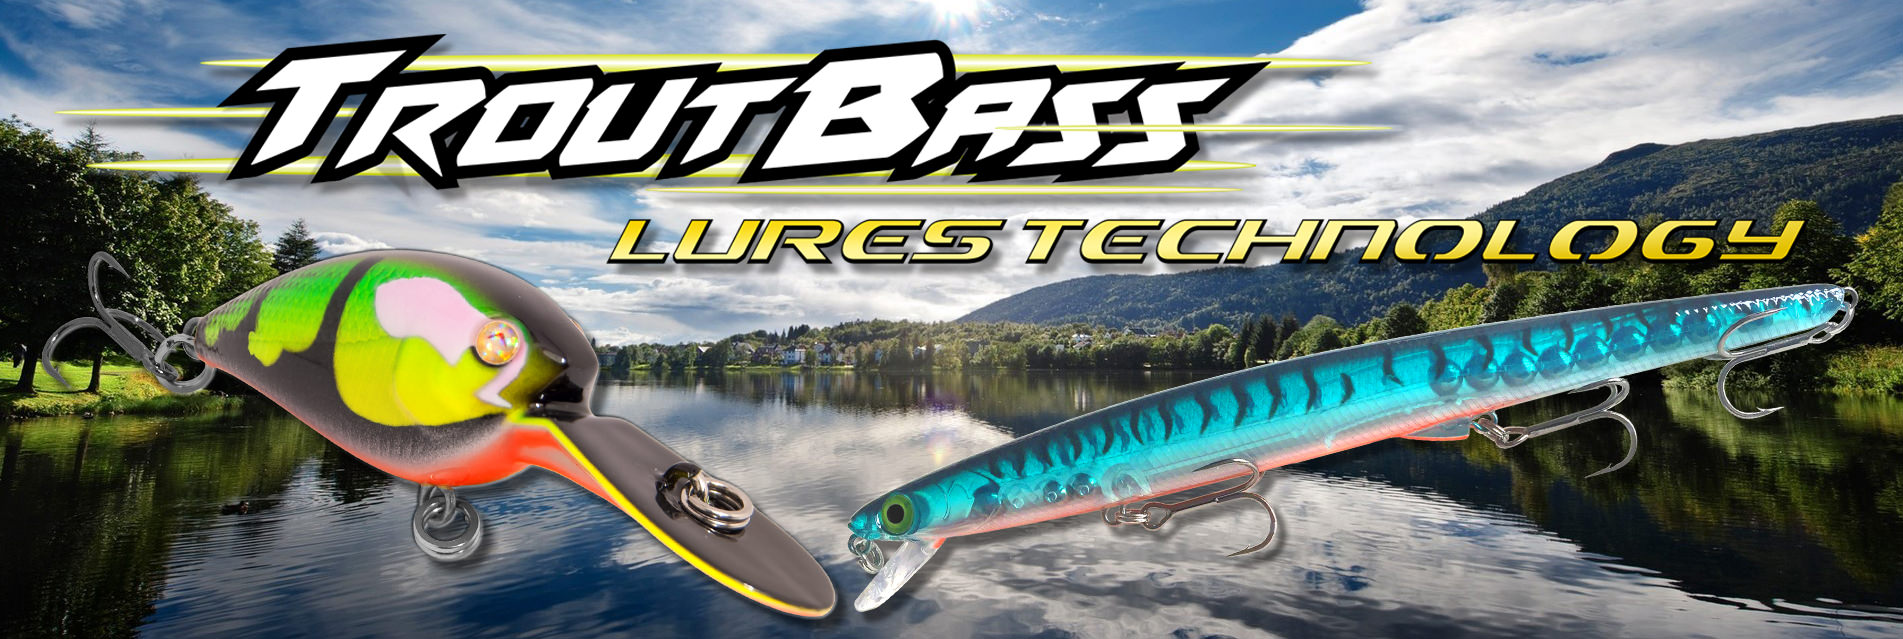 Troutbass Lures